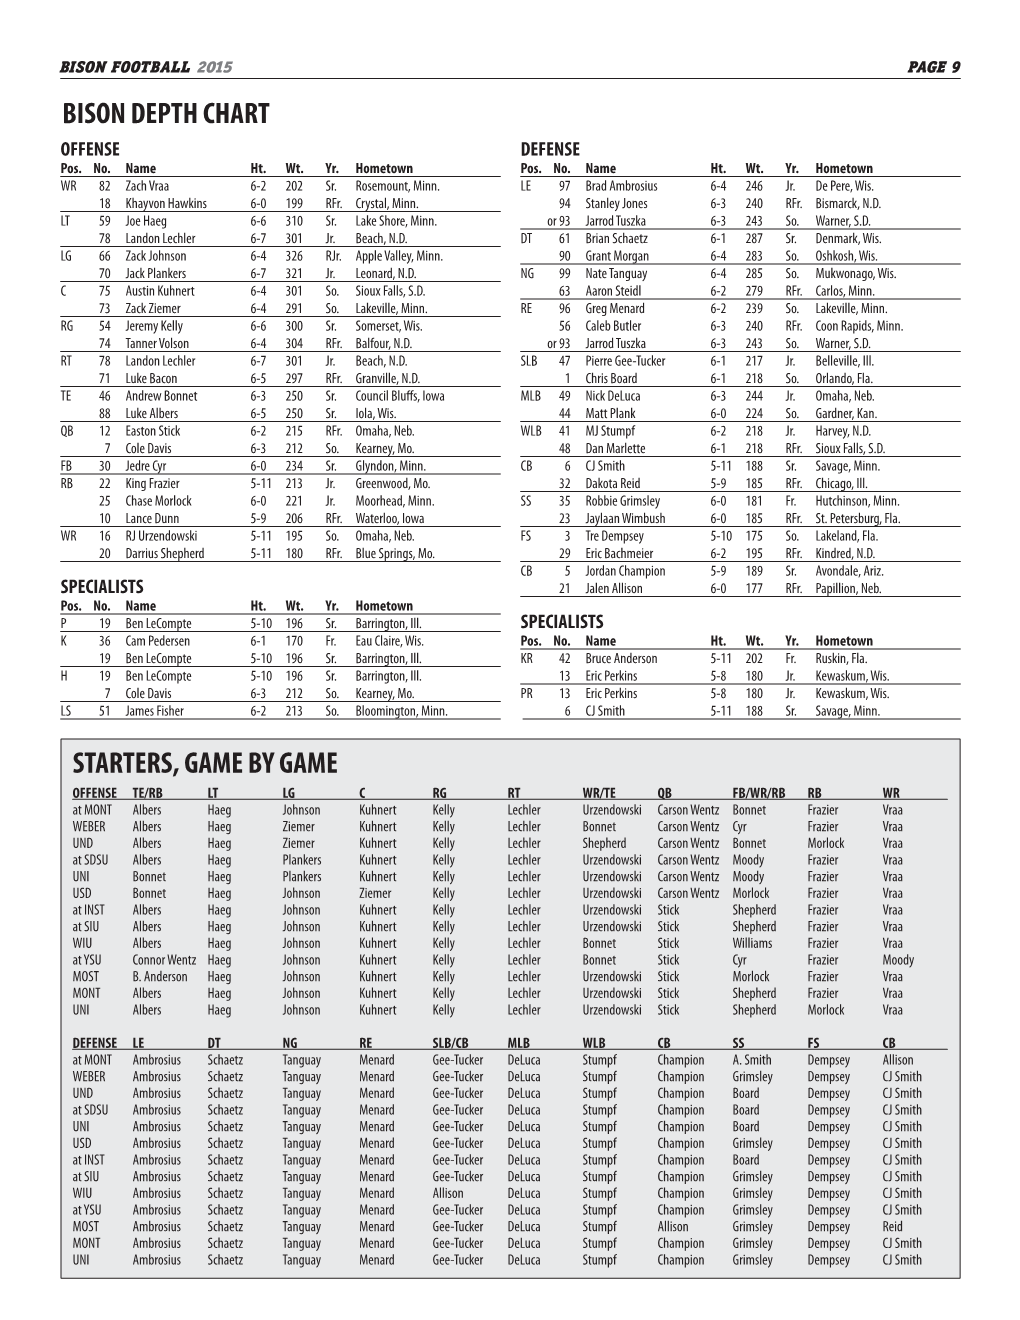 Bison Depth Chart Starters, Game by Game